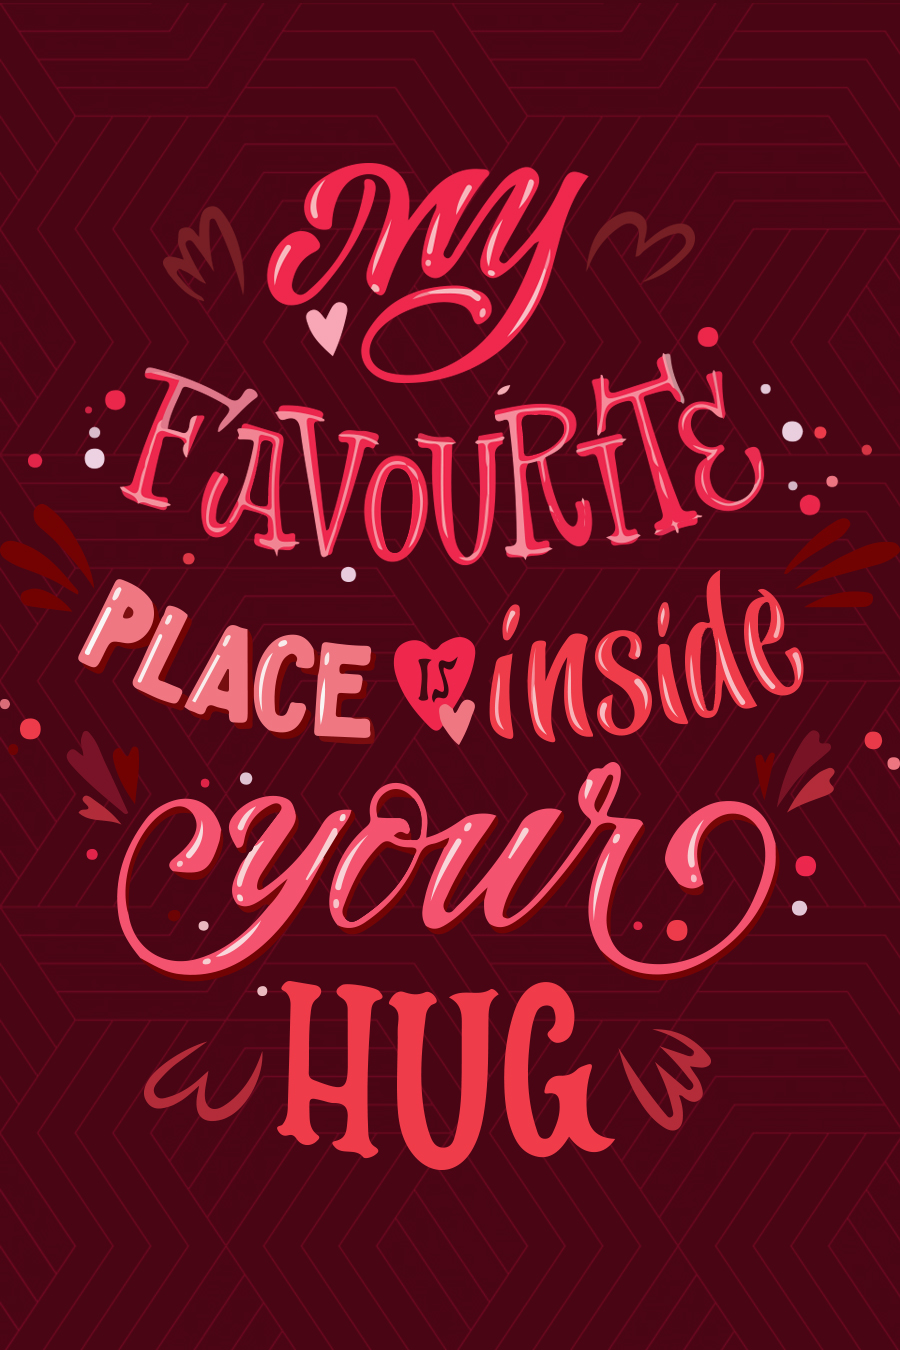 FREE: My favourite place is inside your hug: Valentine Notebook For Men, Love Quotes, Valentine’s day gift, Girlfriend gift, Love Notes Journal, Cute gift by Henry King